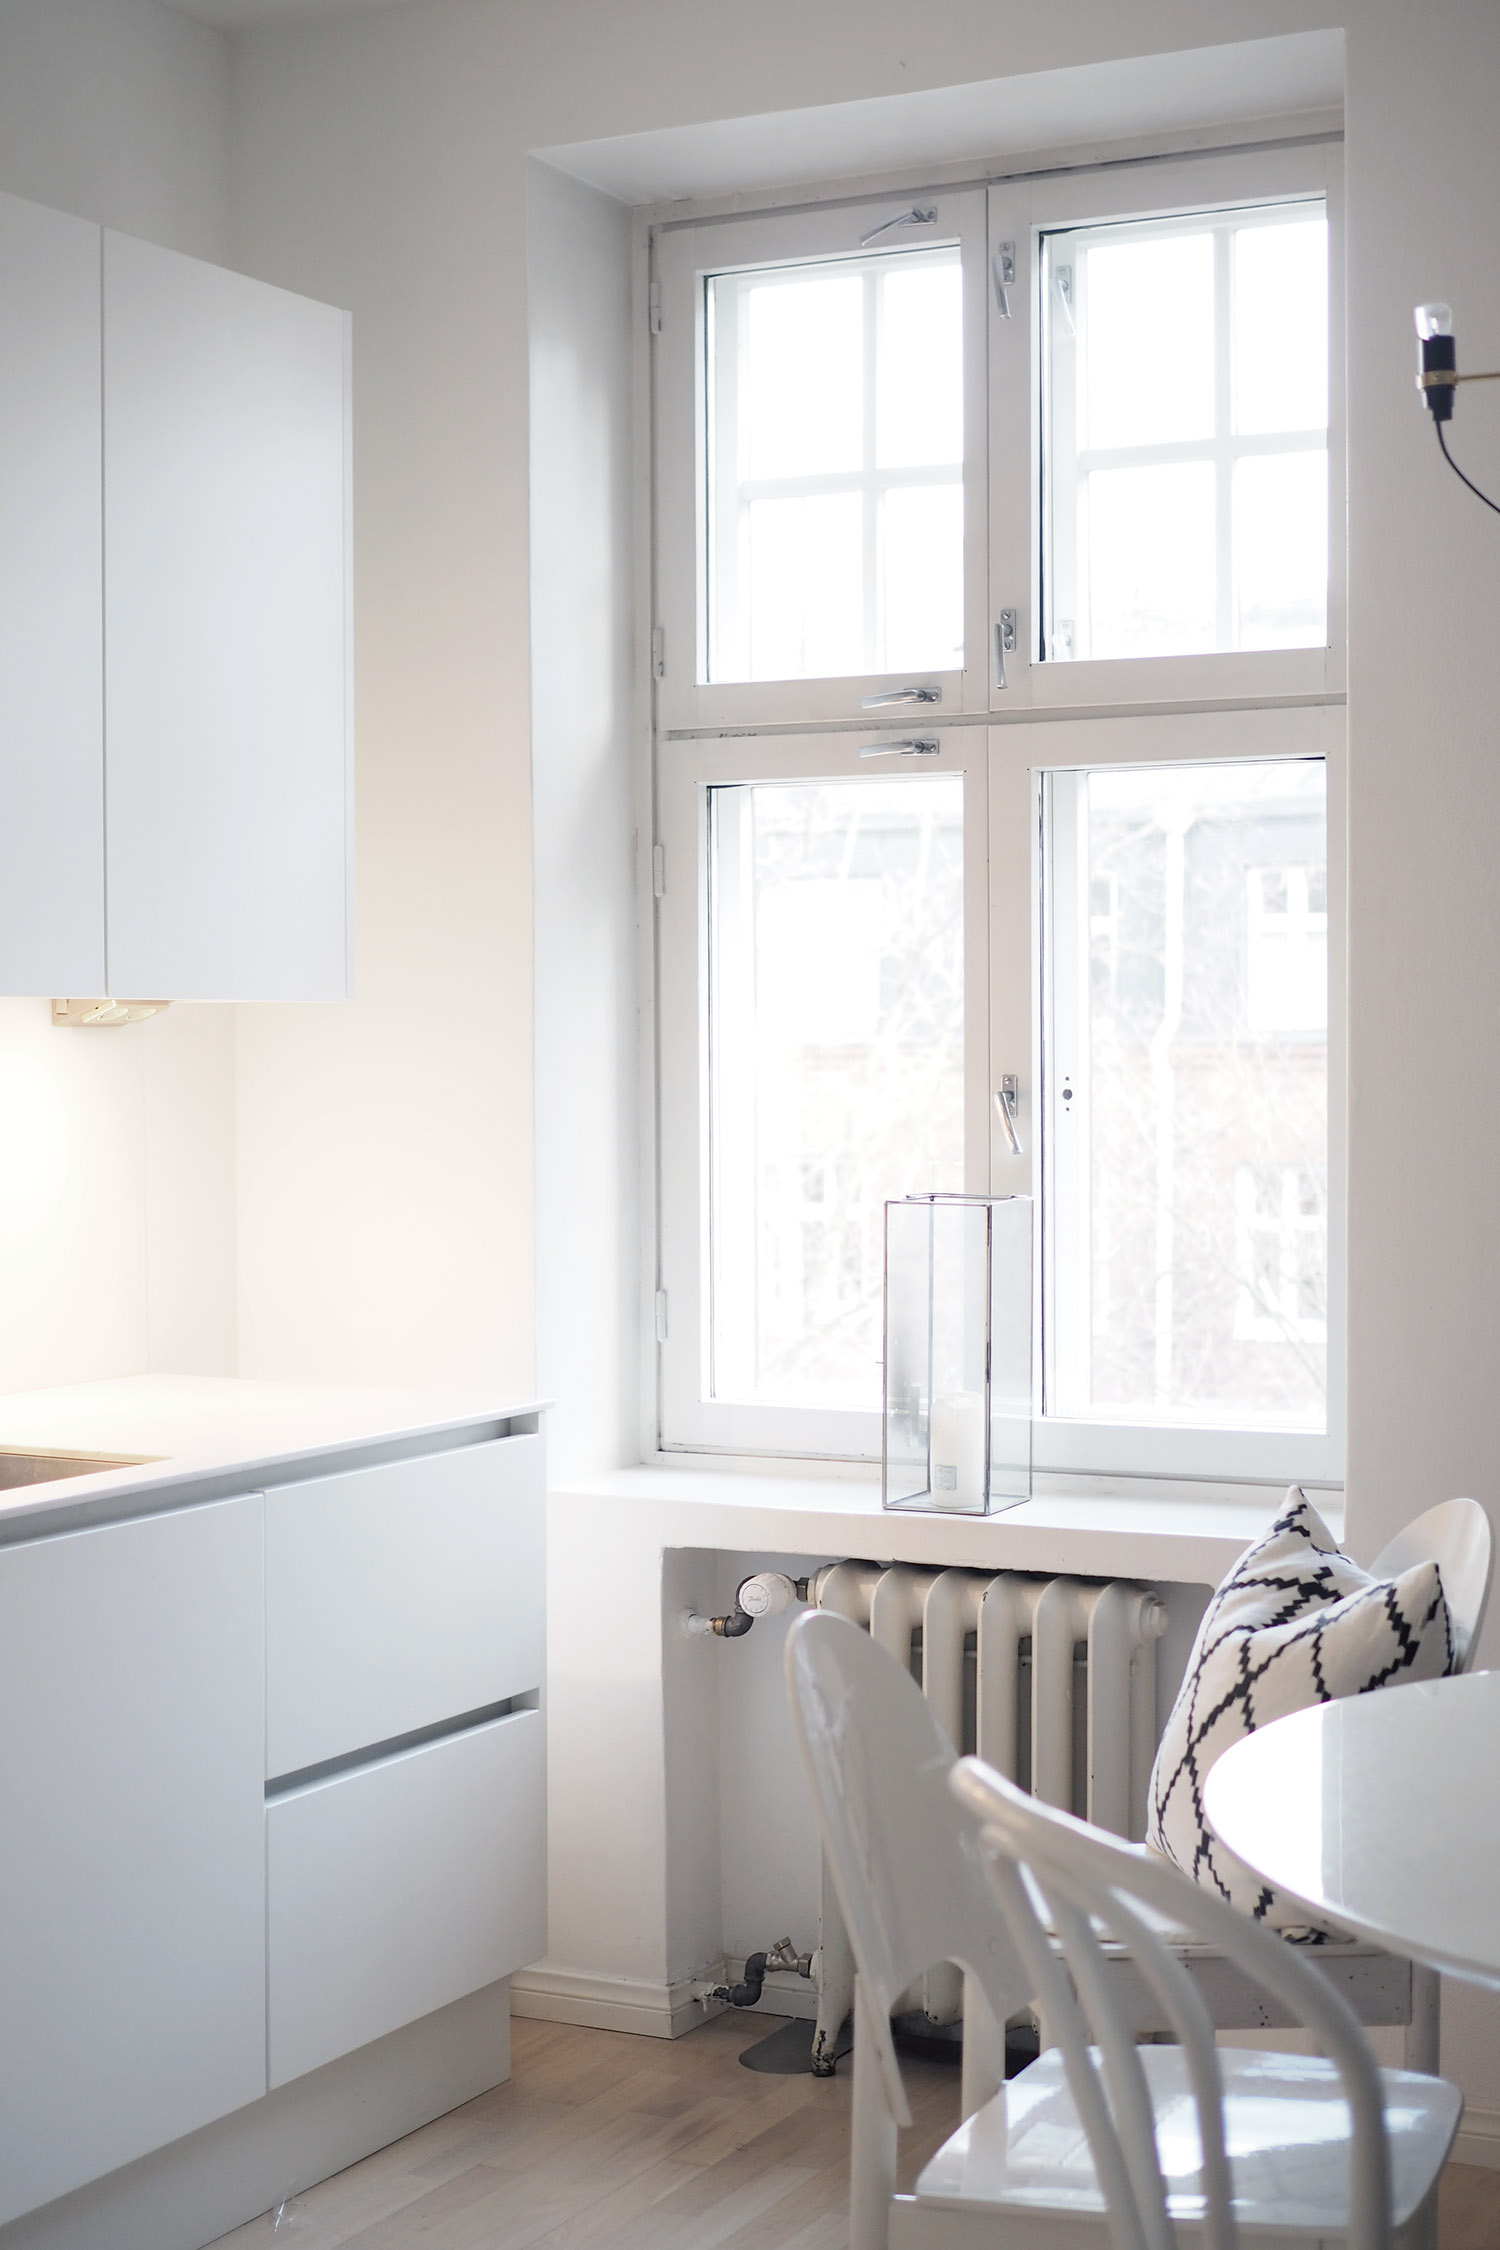 C and the city - White light in the kitchen - see more interior pictures on the blog: //www.idealista.fi/charandthecity/2016/11/20/keittio-2